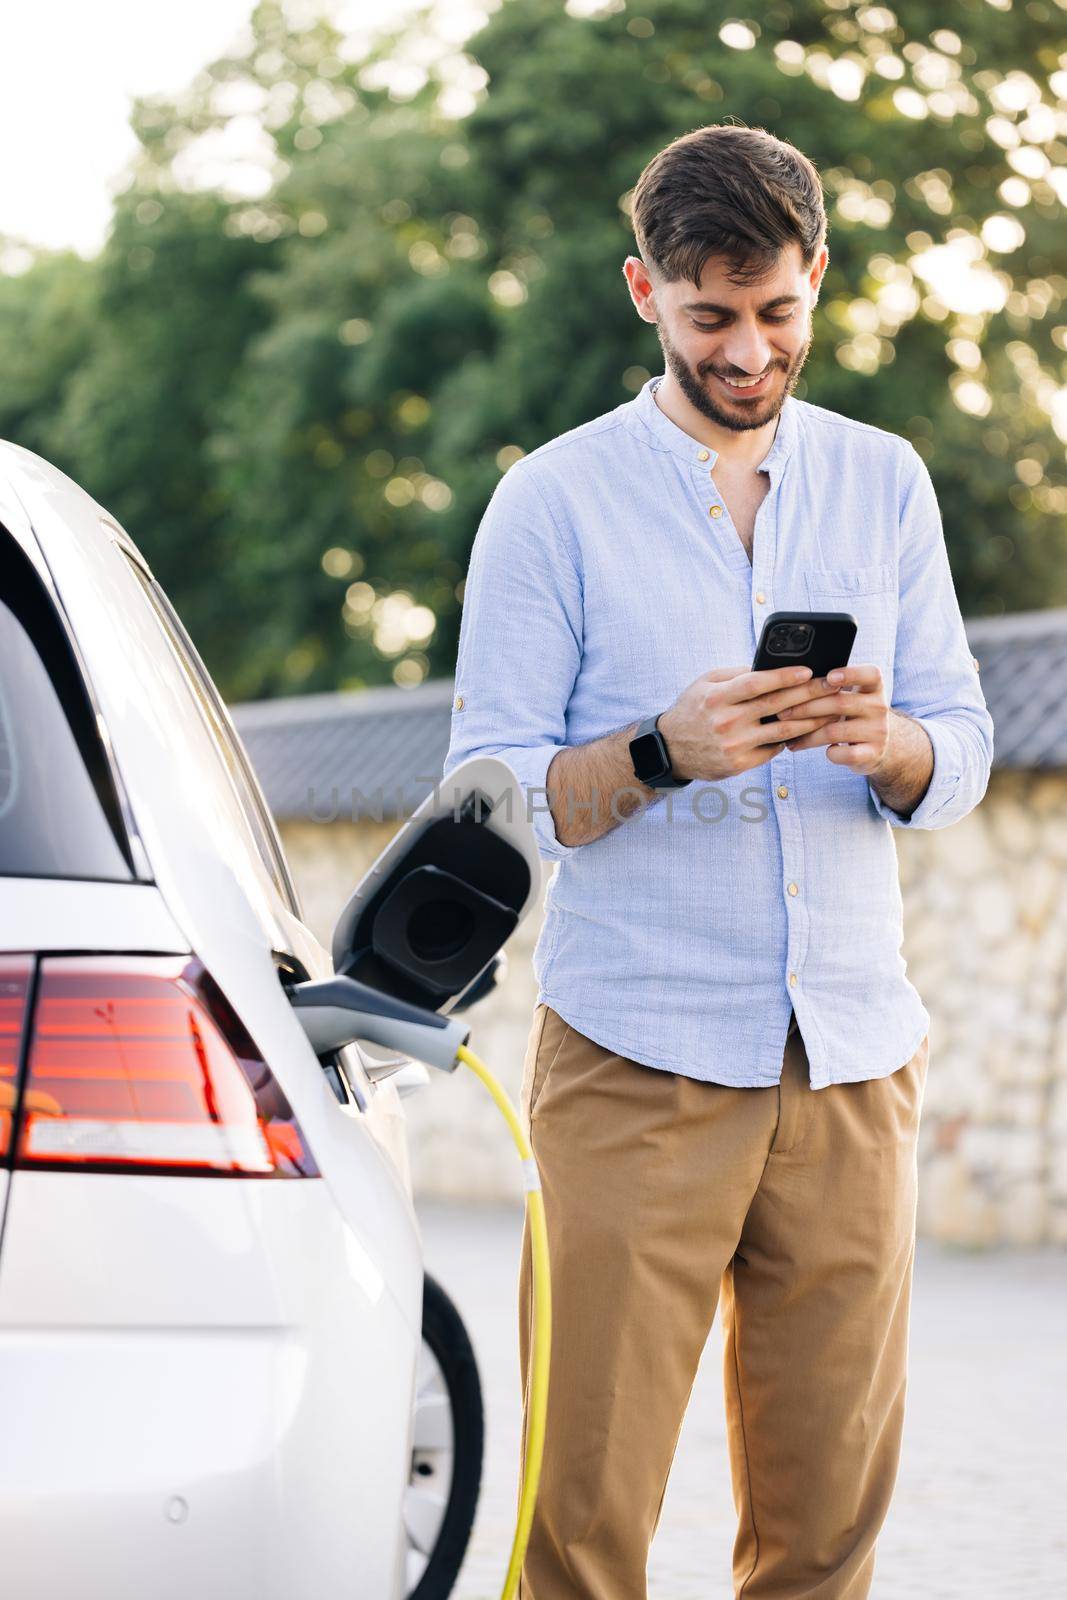 Bearded man using smart phone and waiting power supply connect to electric vehicles for charging the battery in car. Plug charging an Electric car from charging station by uflypro